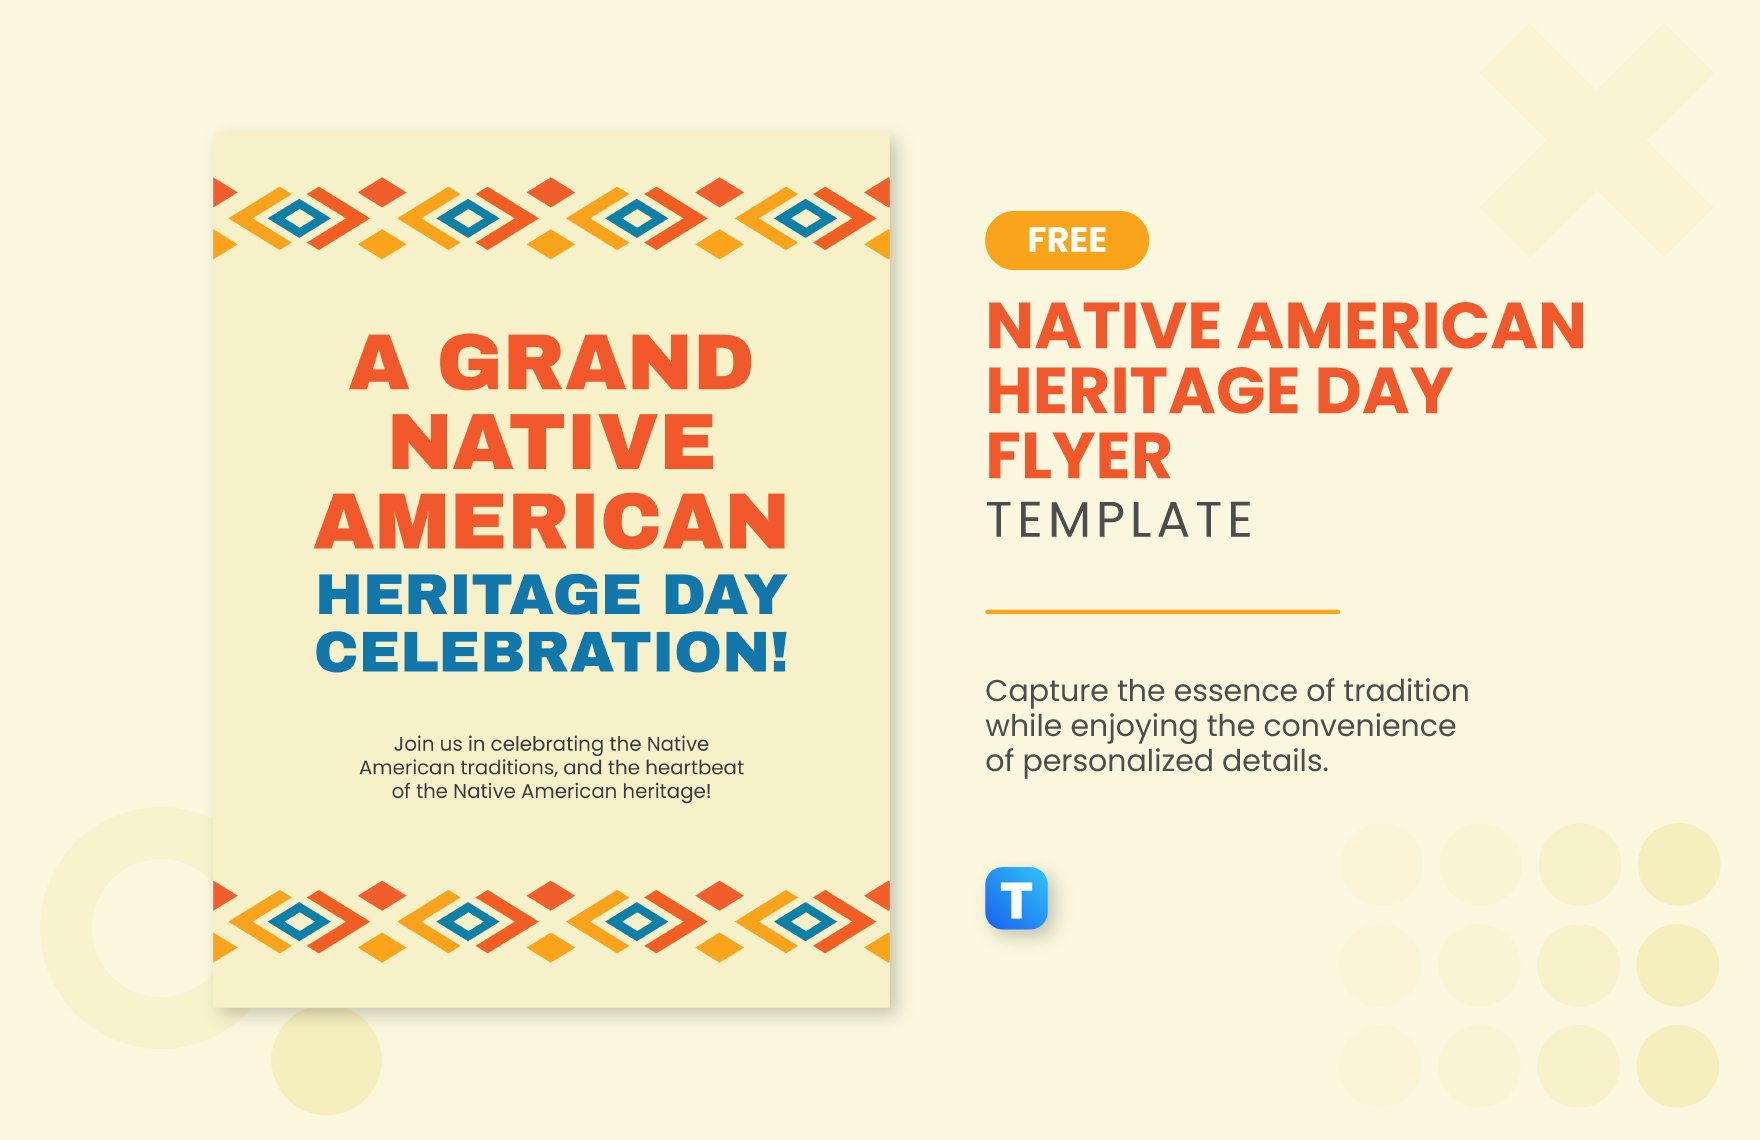 Native American Heritage Day Flyer Template